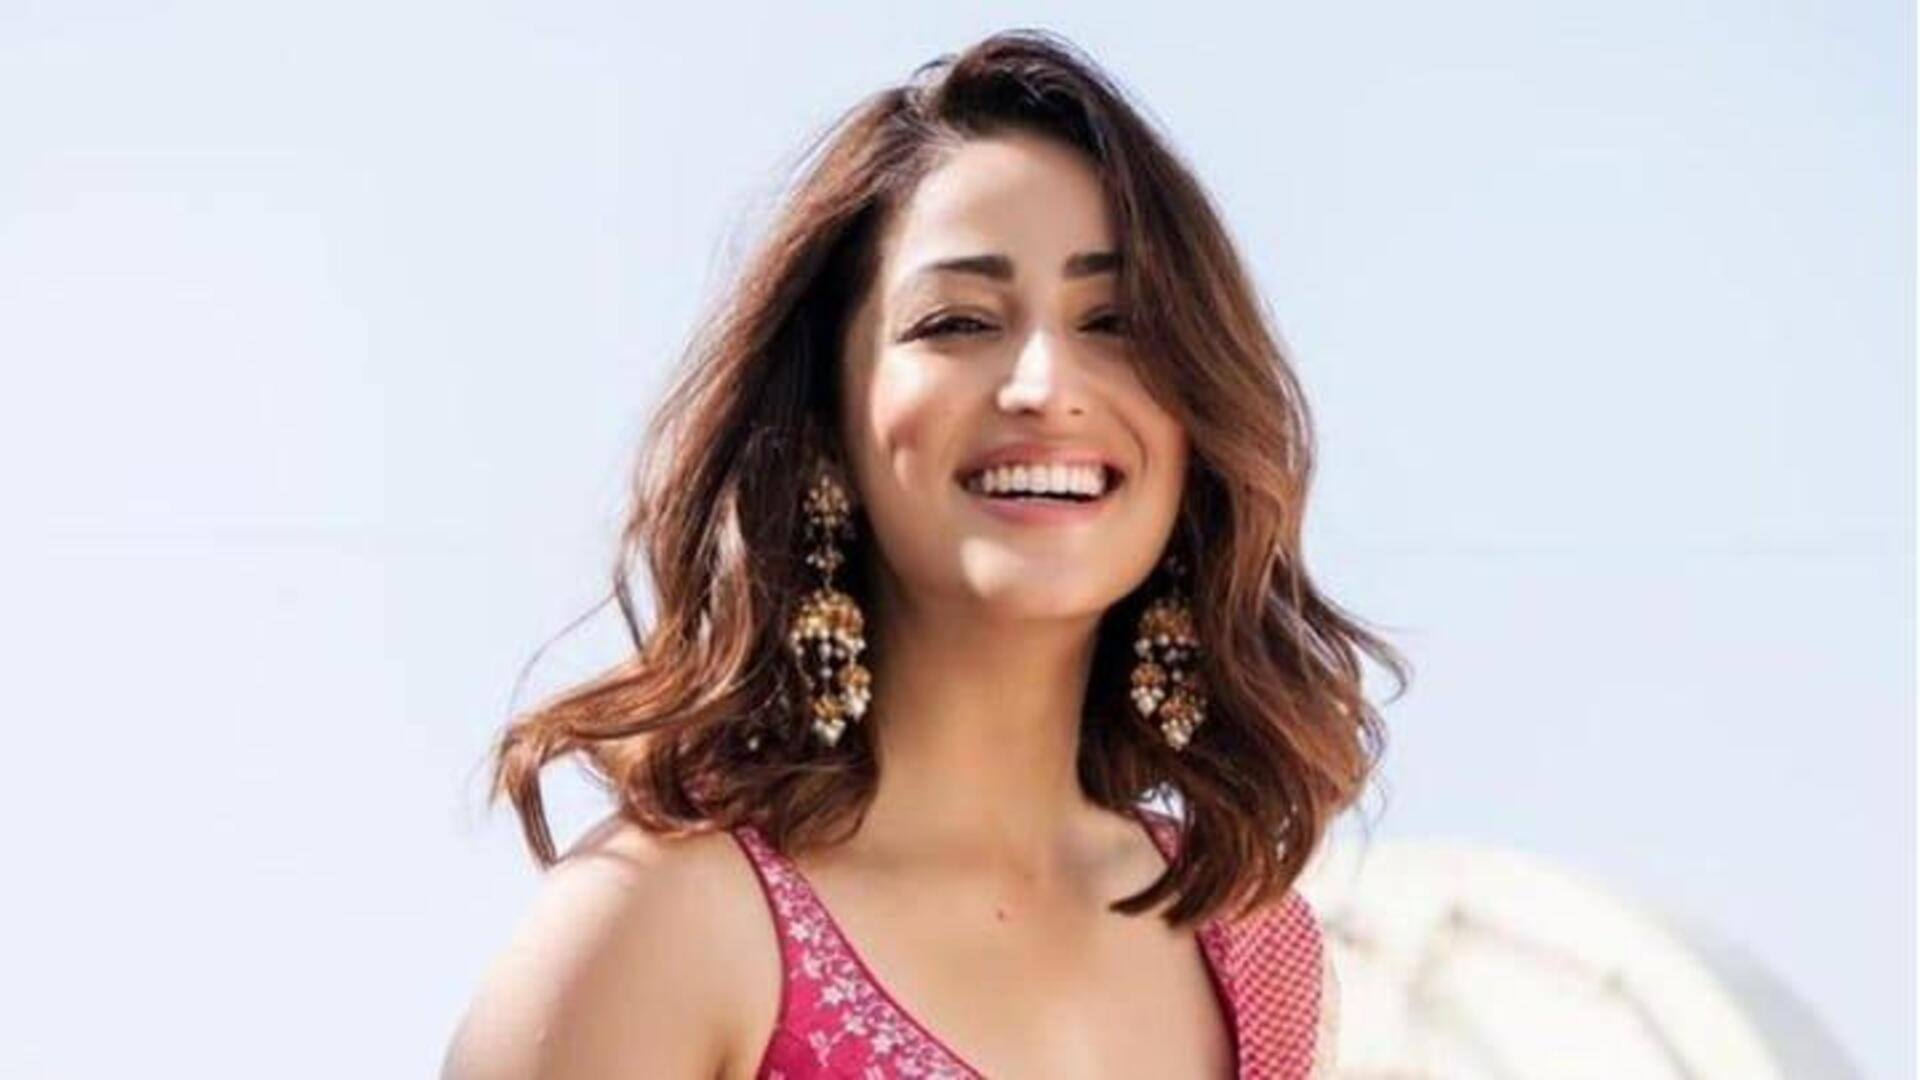 Yami Gautam reacts to being called 'underutilized' in Bollywood